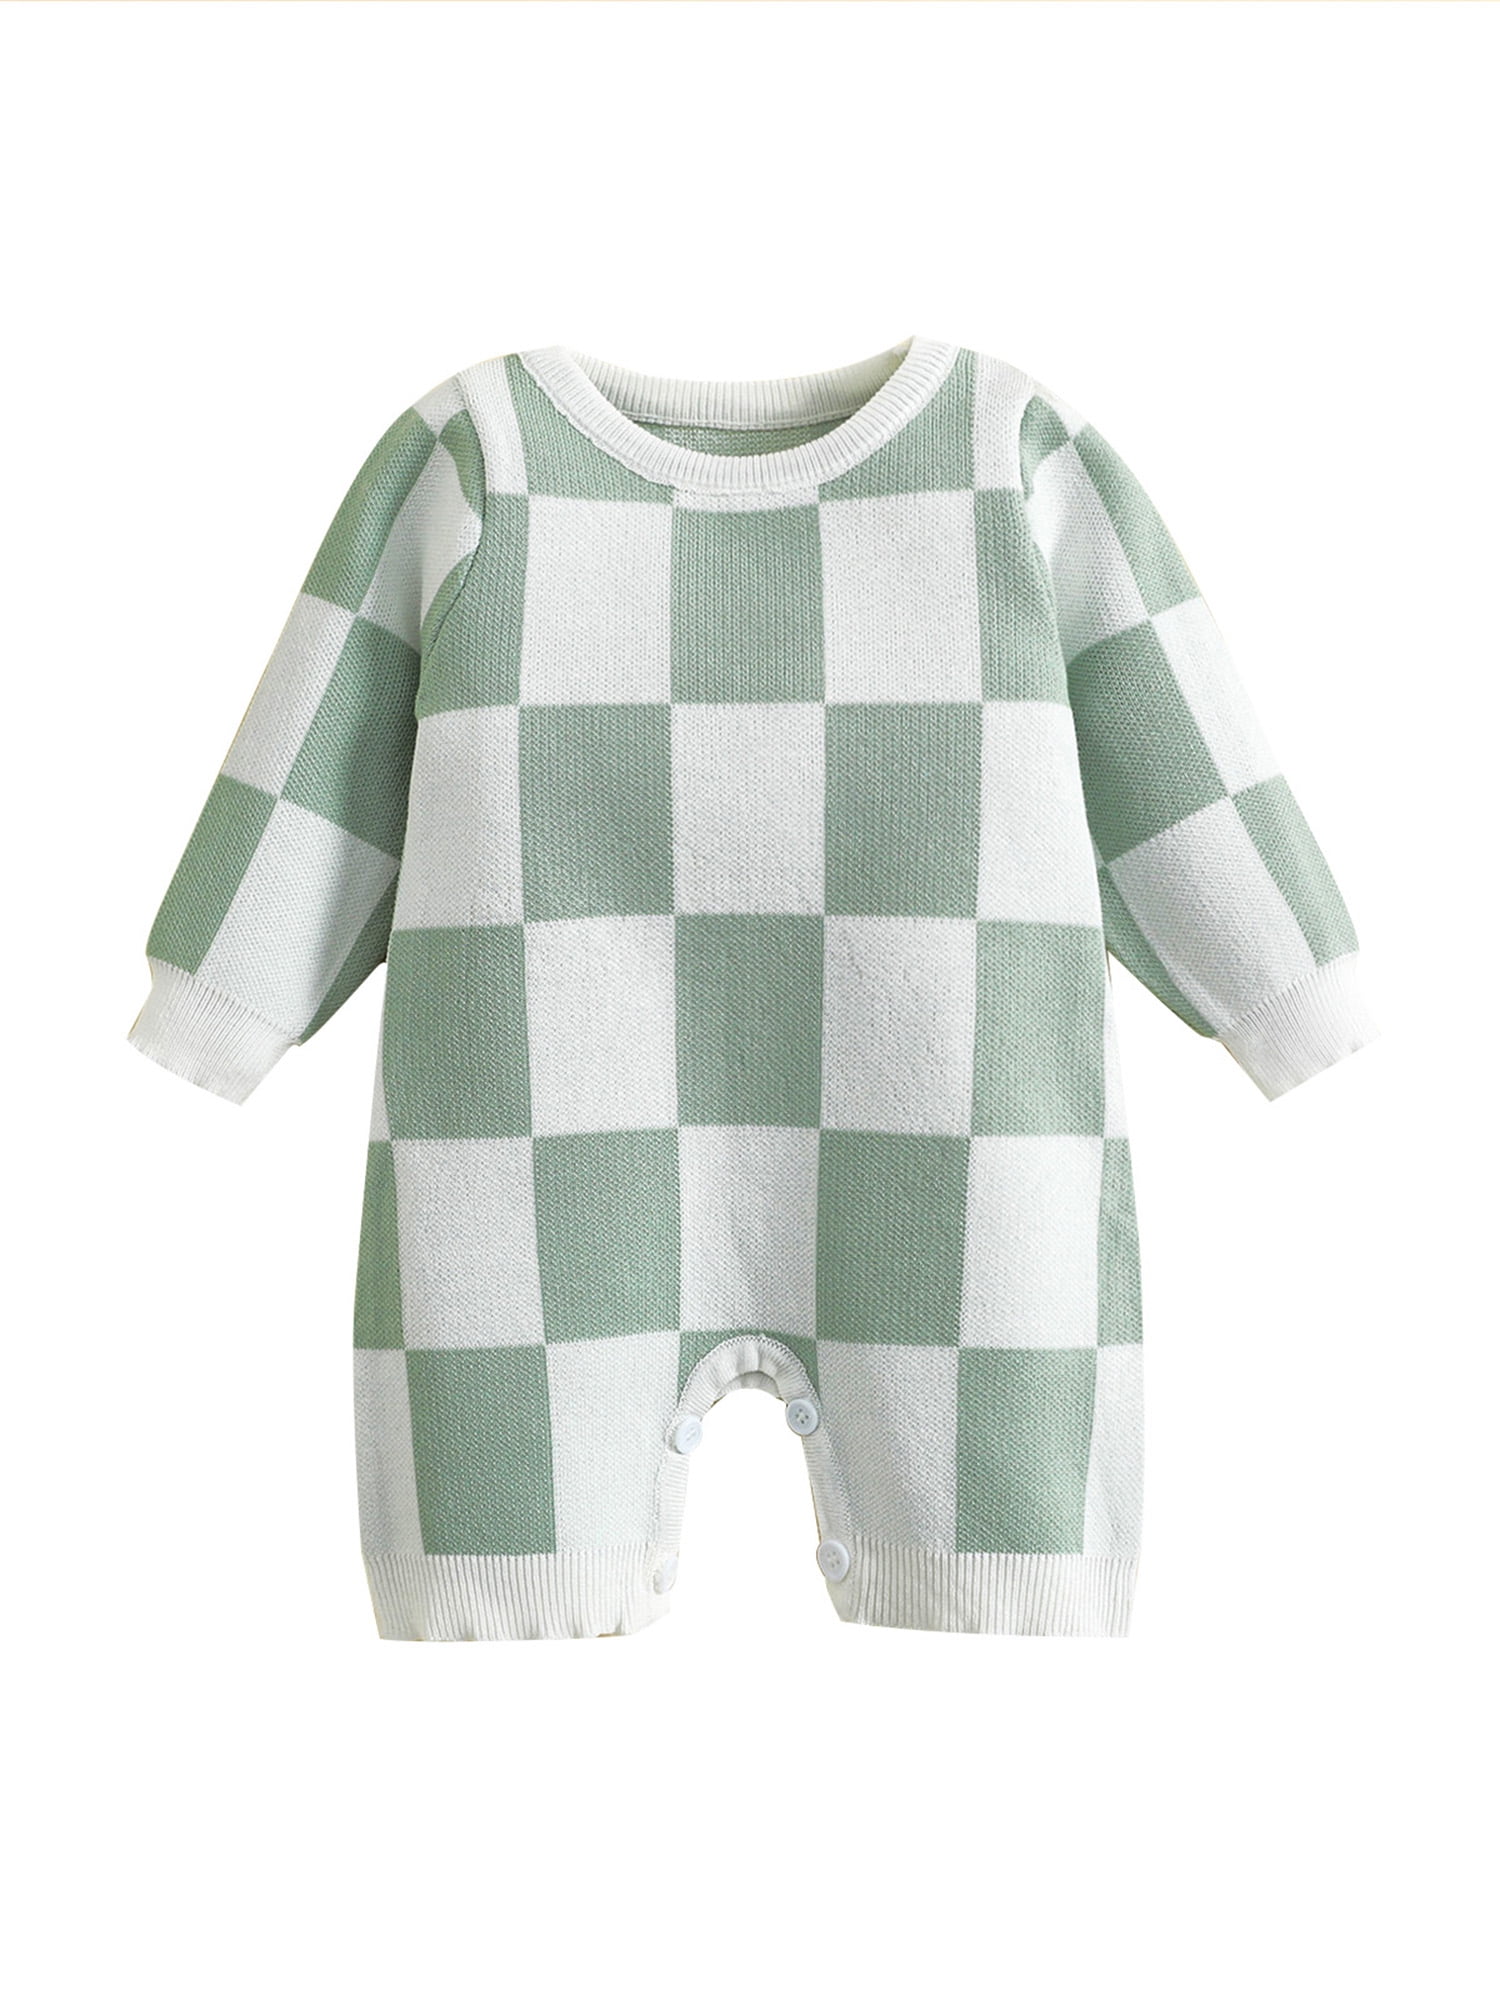 LOSIBUDSA Baby Boy Girl Checkered Sweatshirt Romper Oversized Onesies Long Sleeve Bubble Romper Top Neutral Baby Fall Clothes, Infant Unisex, Size: 0